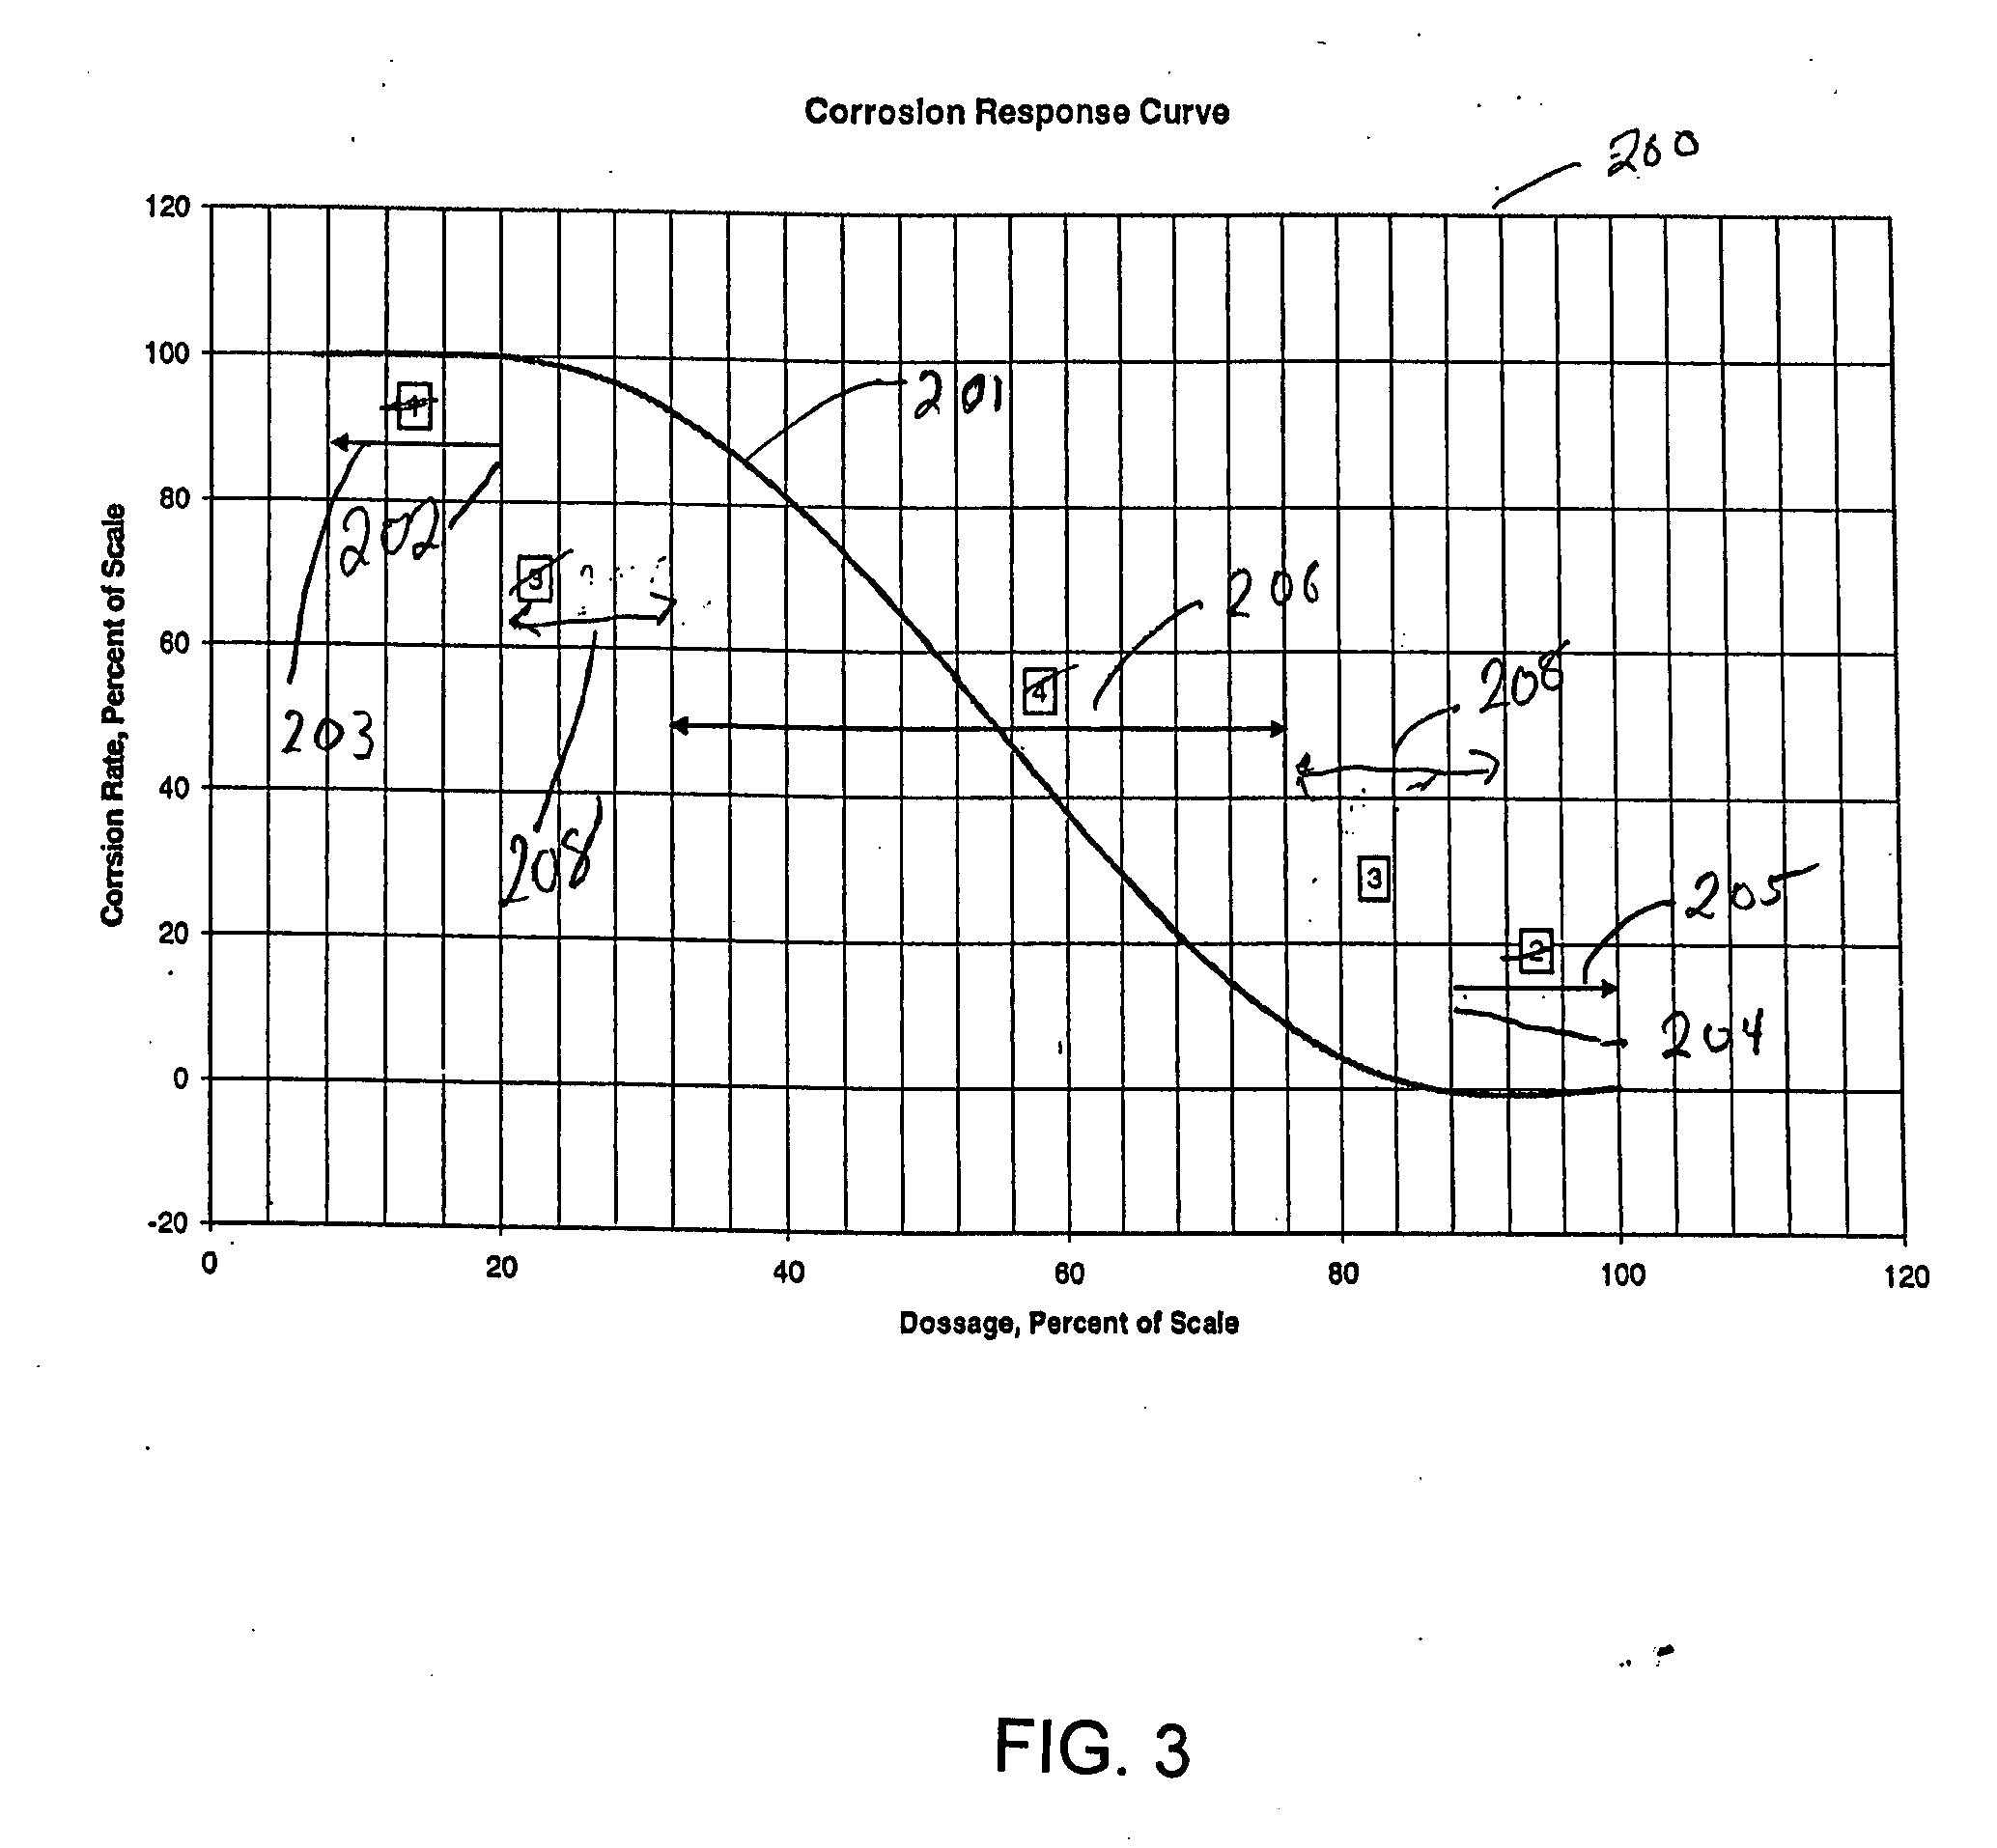 Chemical treatment system and method